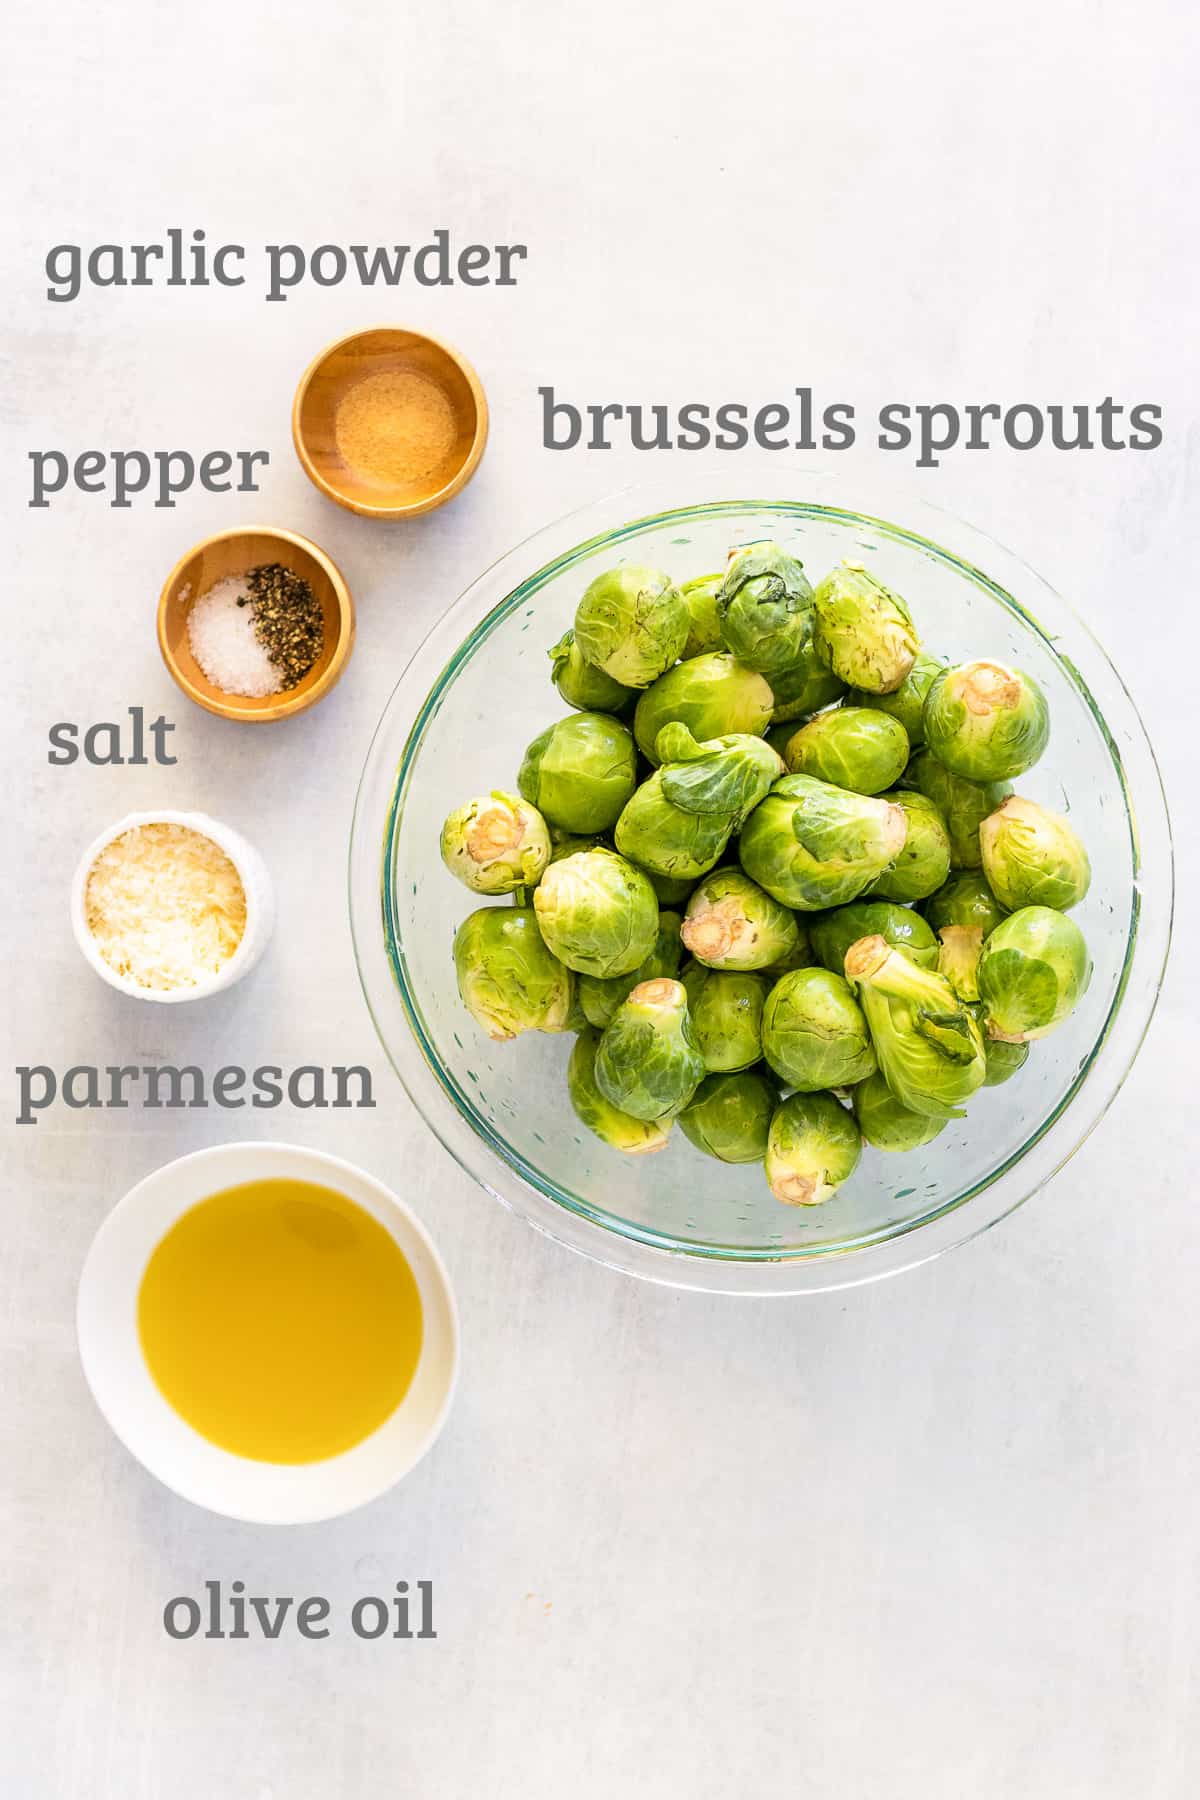 Ingredients for brussels sprouts chips - brussels sprouts, parmesan, olive oil, salt, pepper, and garlic powder